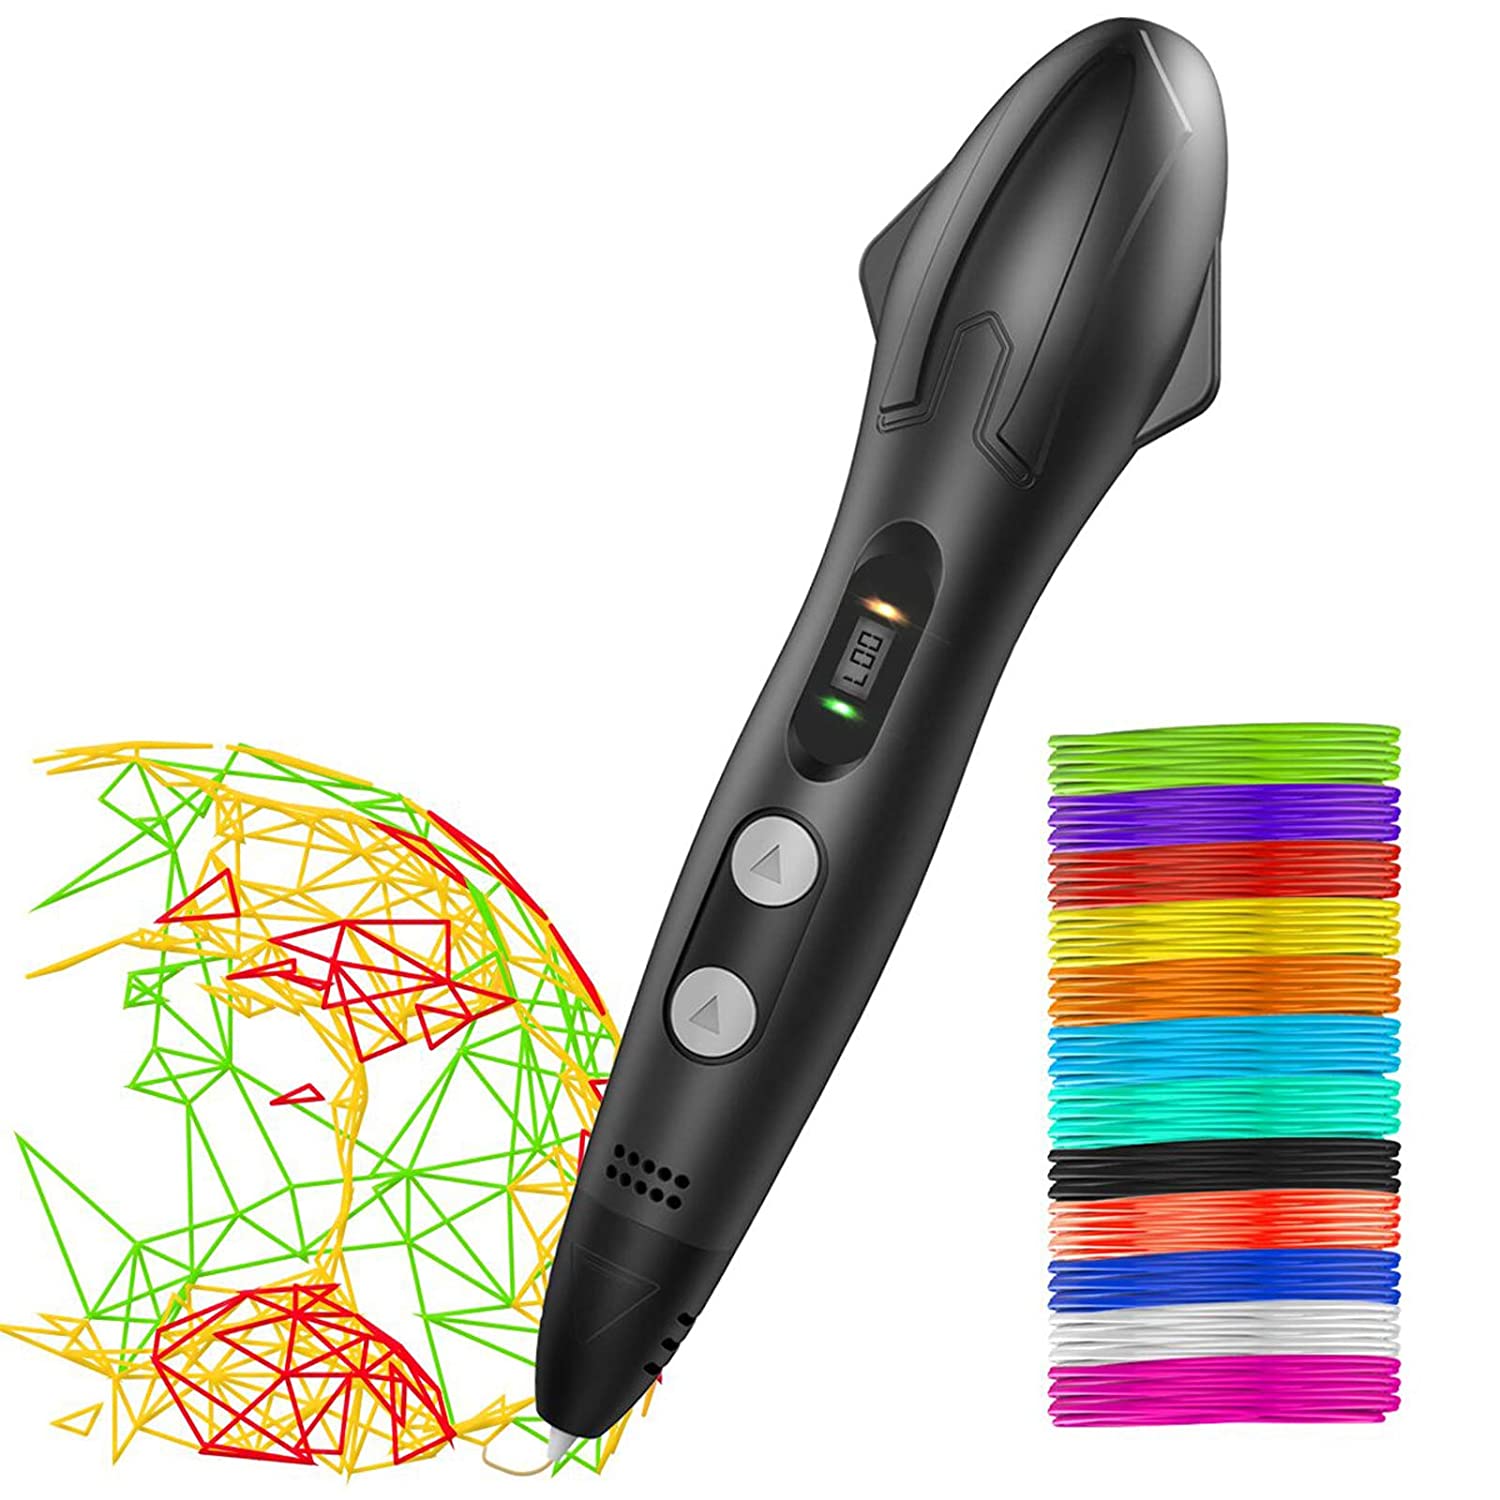 be-tim-3d-printing-pen-realizes-three-dimensional-creation-and-releases-imagination-2021-2-22